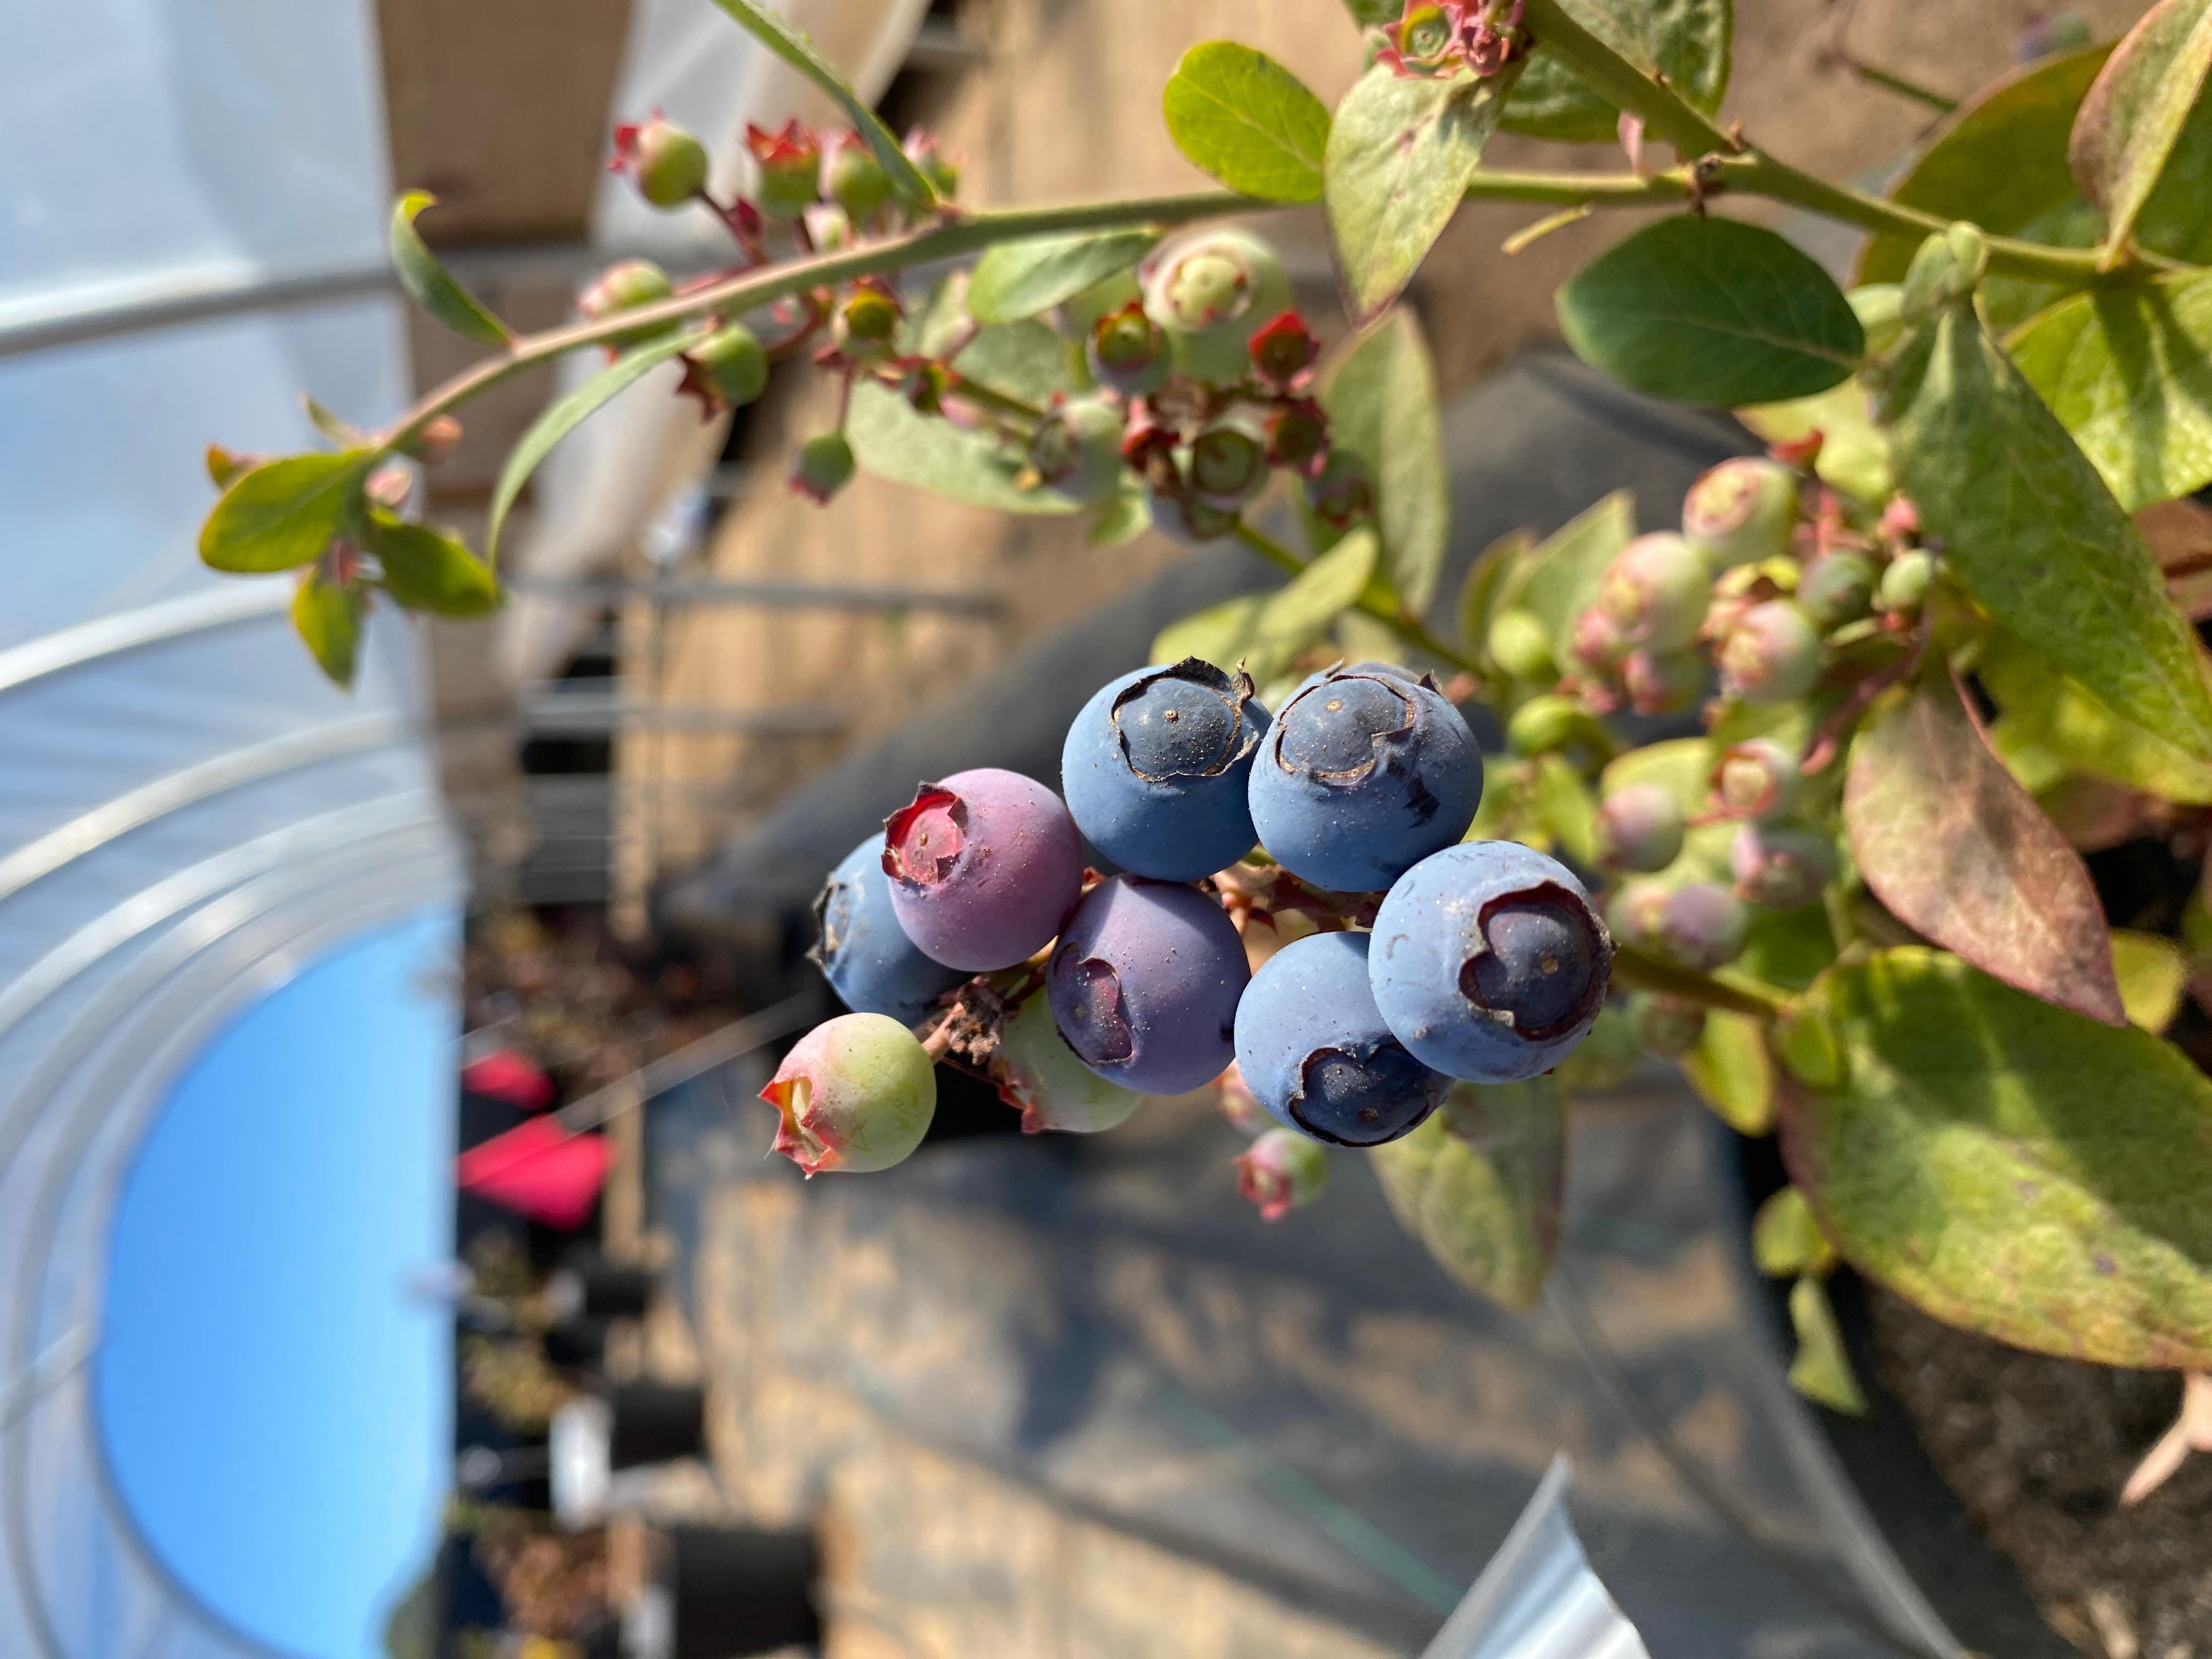 A cluster of ripe and unripe Snowchaser blueberries